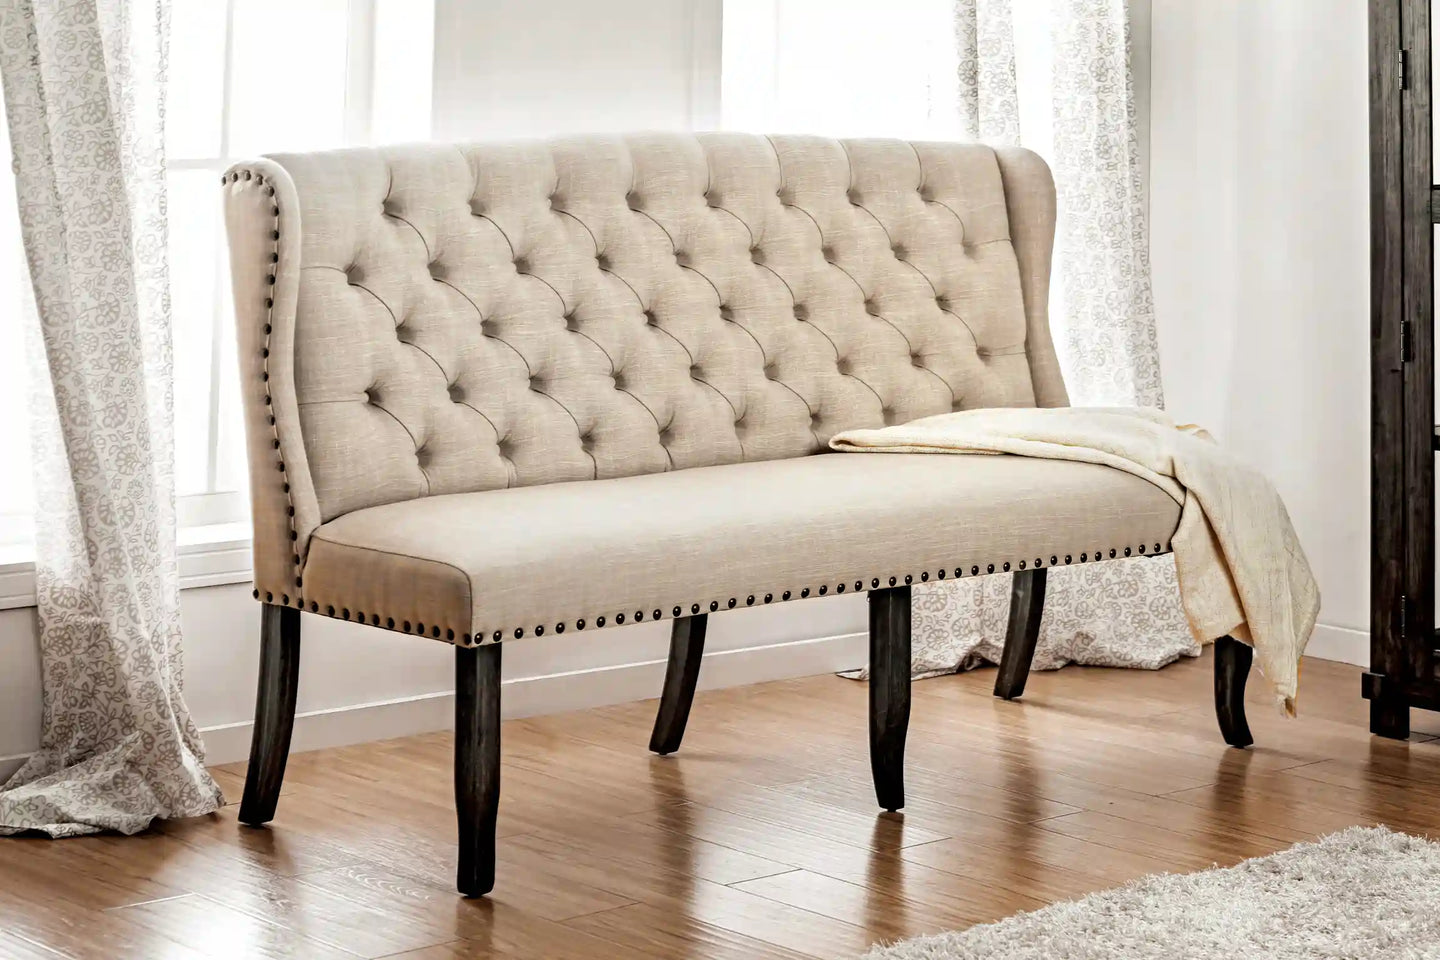 Furniture of America Colla Rustic Button Tufted 3-Seater Loveseat Bench - IDF-3324BK-BNL